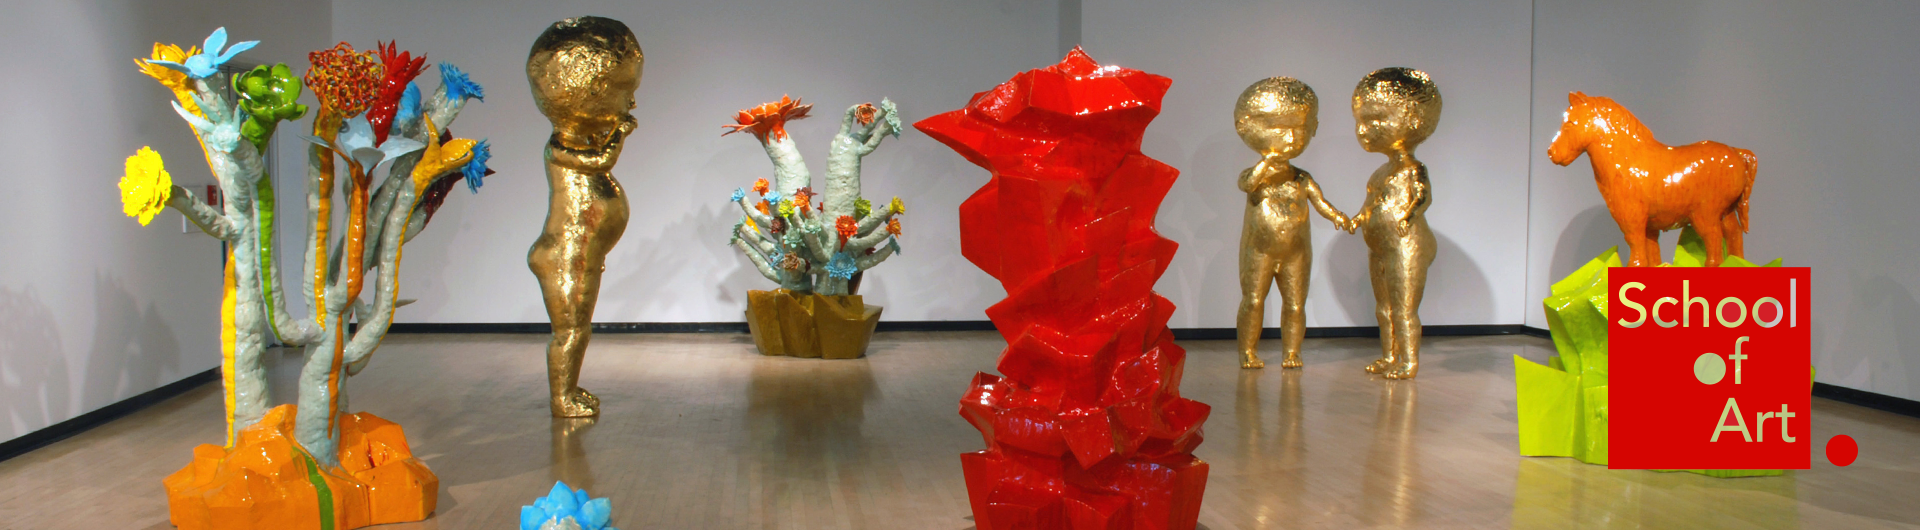 Large, colorful sculptures on display in an art gallery